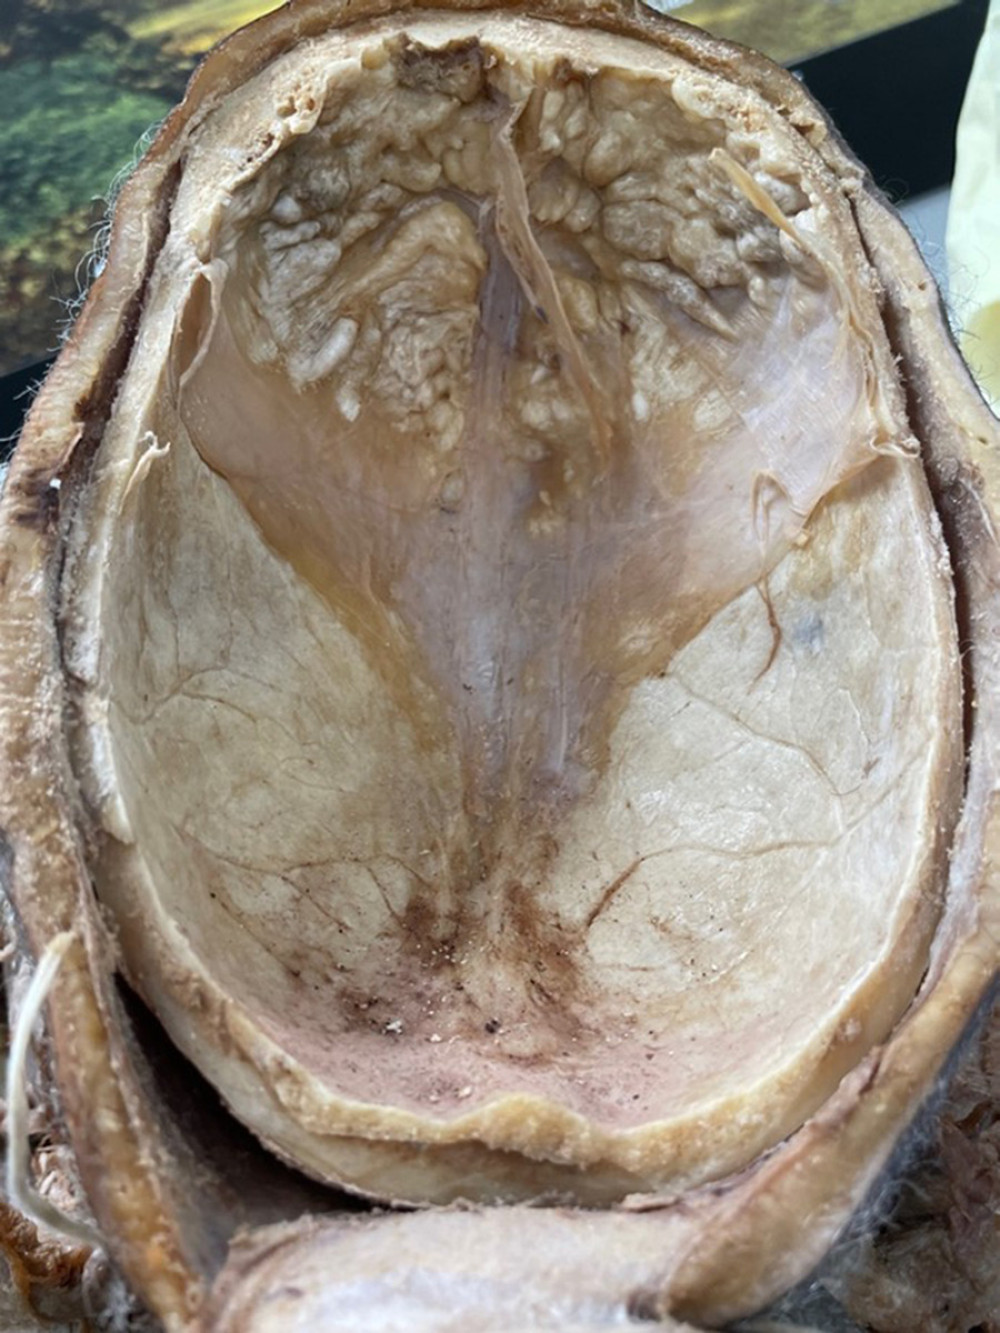 The top half of the donor’s skull showing the bumpy nature of the overgrowths found.